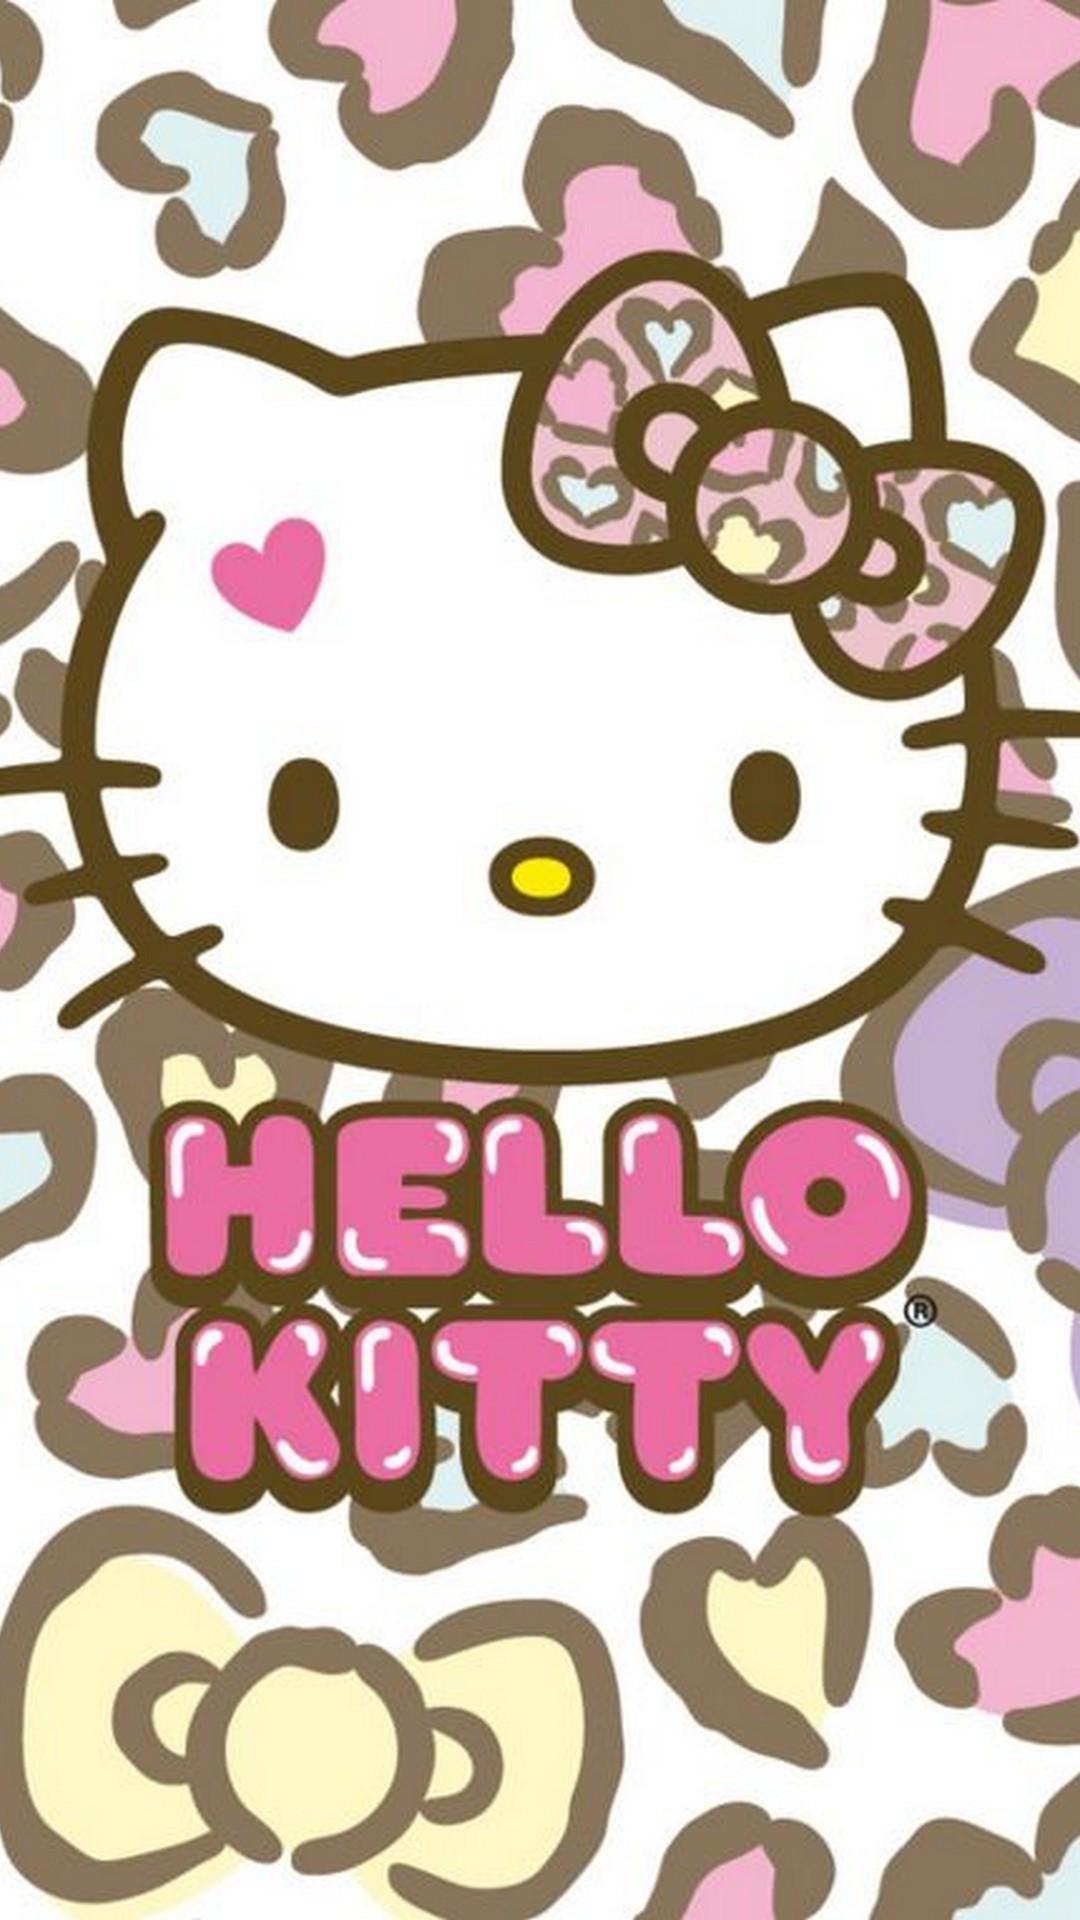 Hello Kitty iPhone Wallpaper HD with image resolution 1080x1920 pixel. You can make this wallpaper for your Desktop Computer Backgrounds, Mac Wallpapers, Android Lock screen or iPhone Screensavers